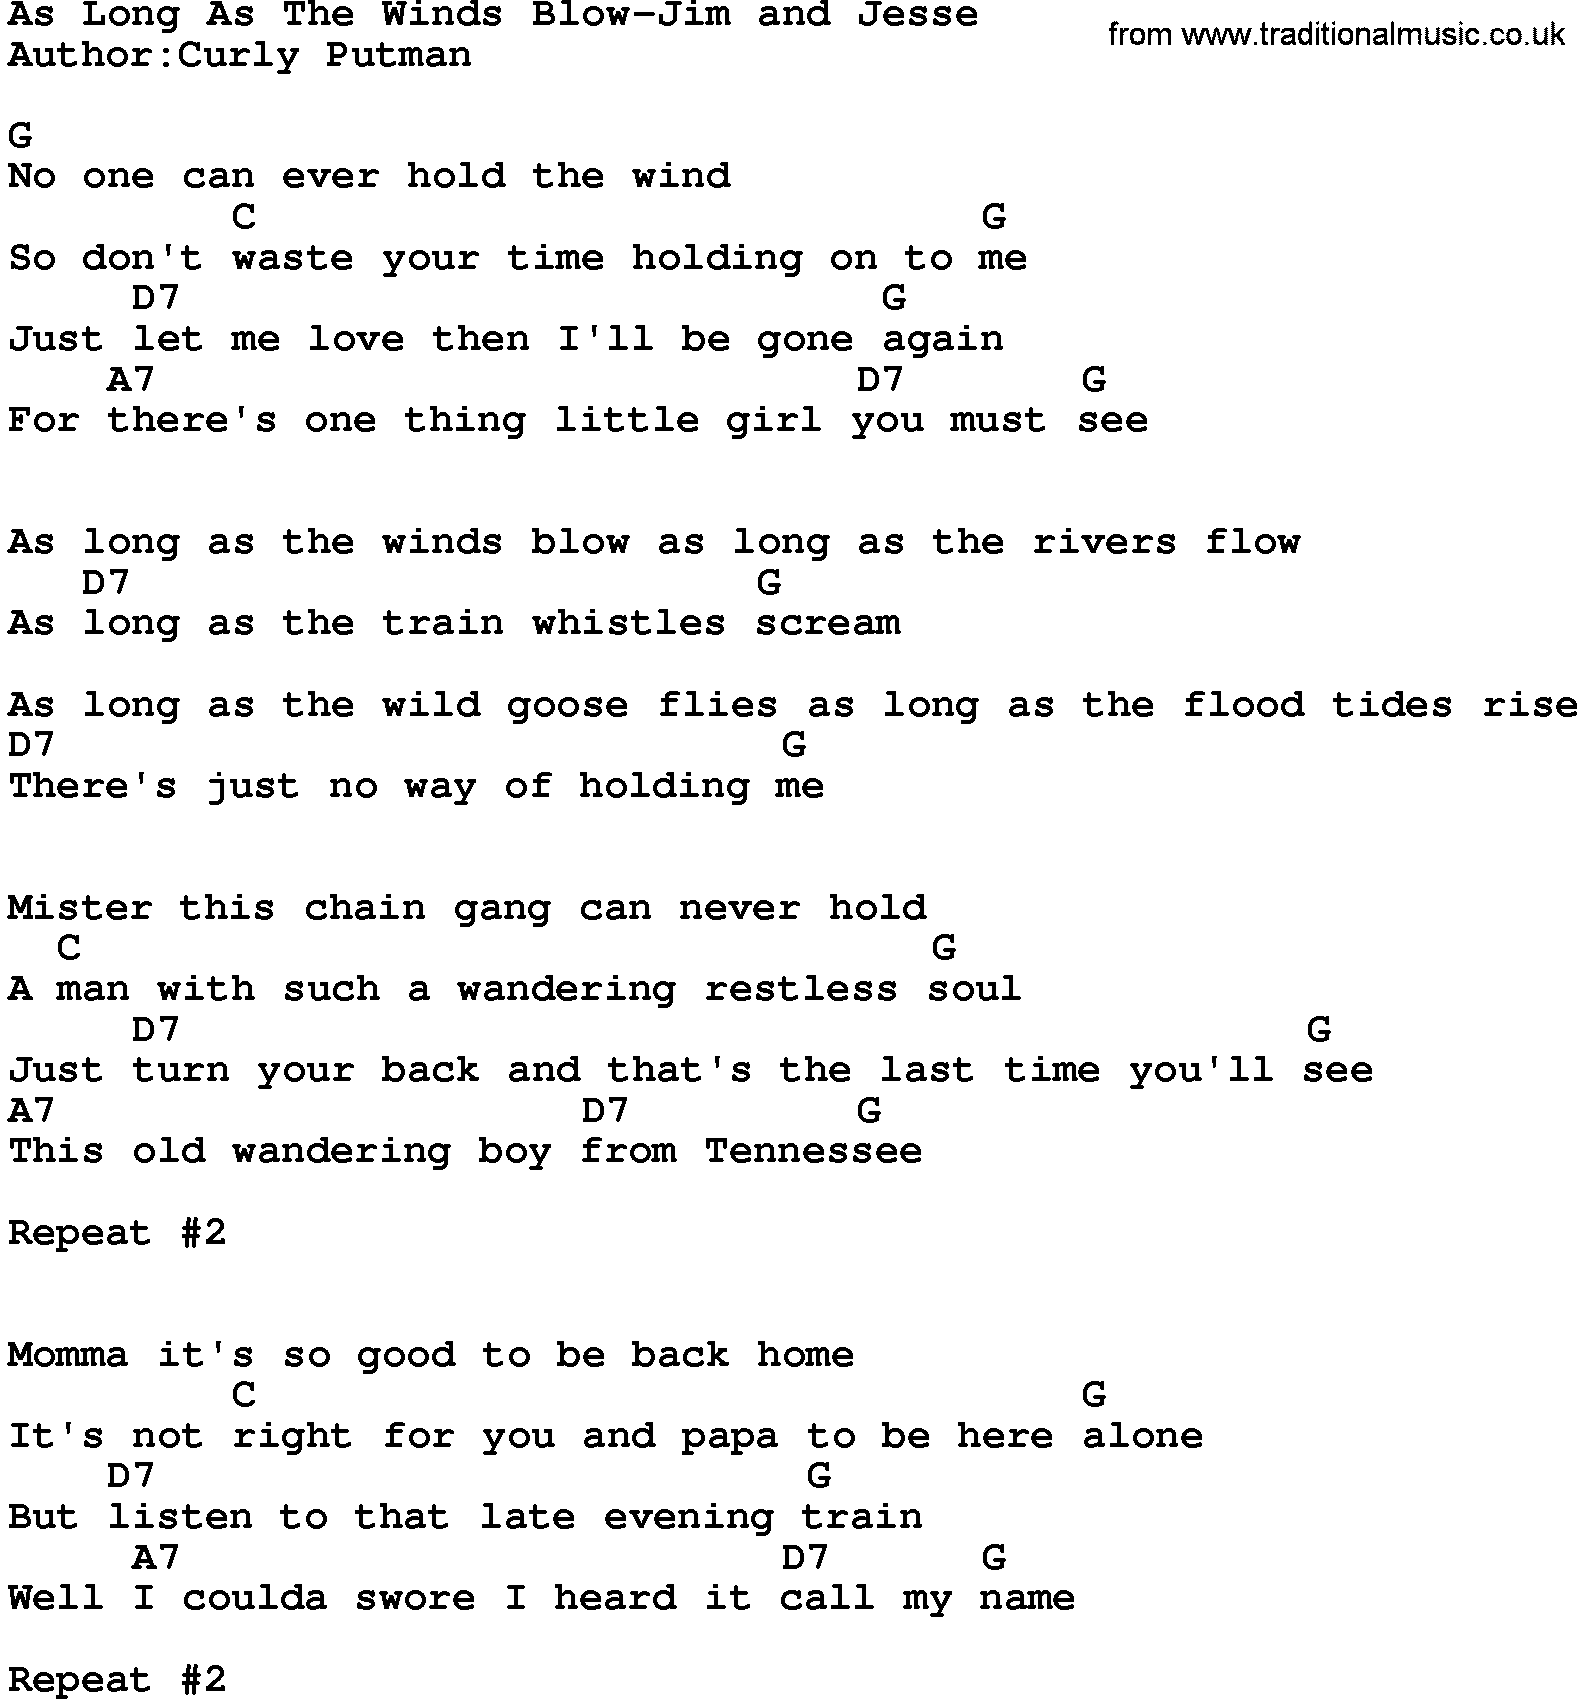 Country music song: As Long As The Winds Blow-Jim And Jesse lyrics and chords